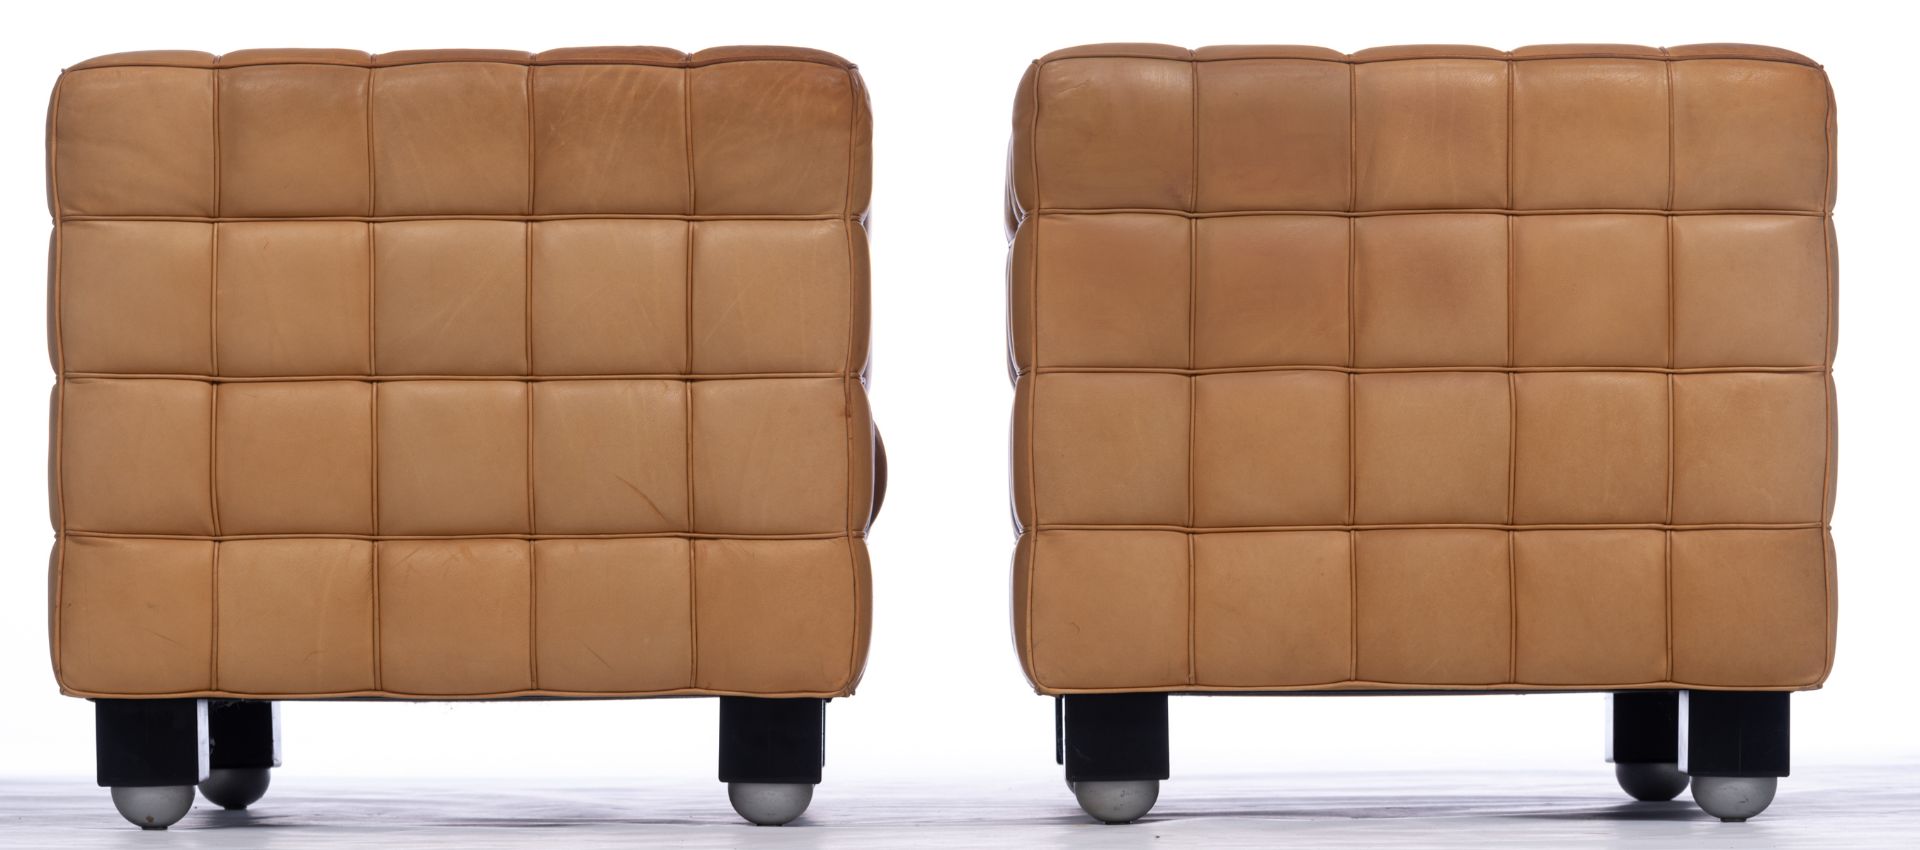 A pair of leather upholstered Kubus Armchairs, design by Josef Hoffmann for Wittmann Austria, the '8 - Bild 5 aus 9